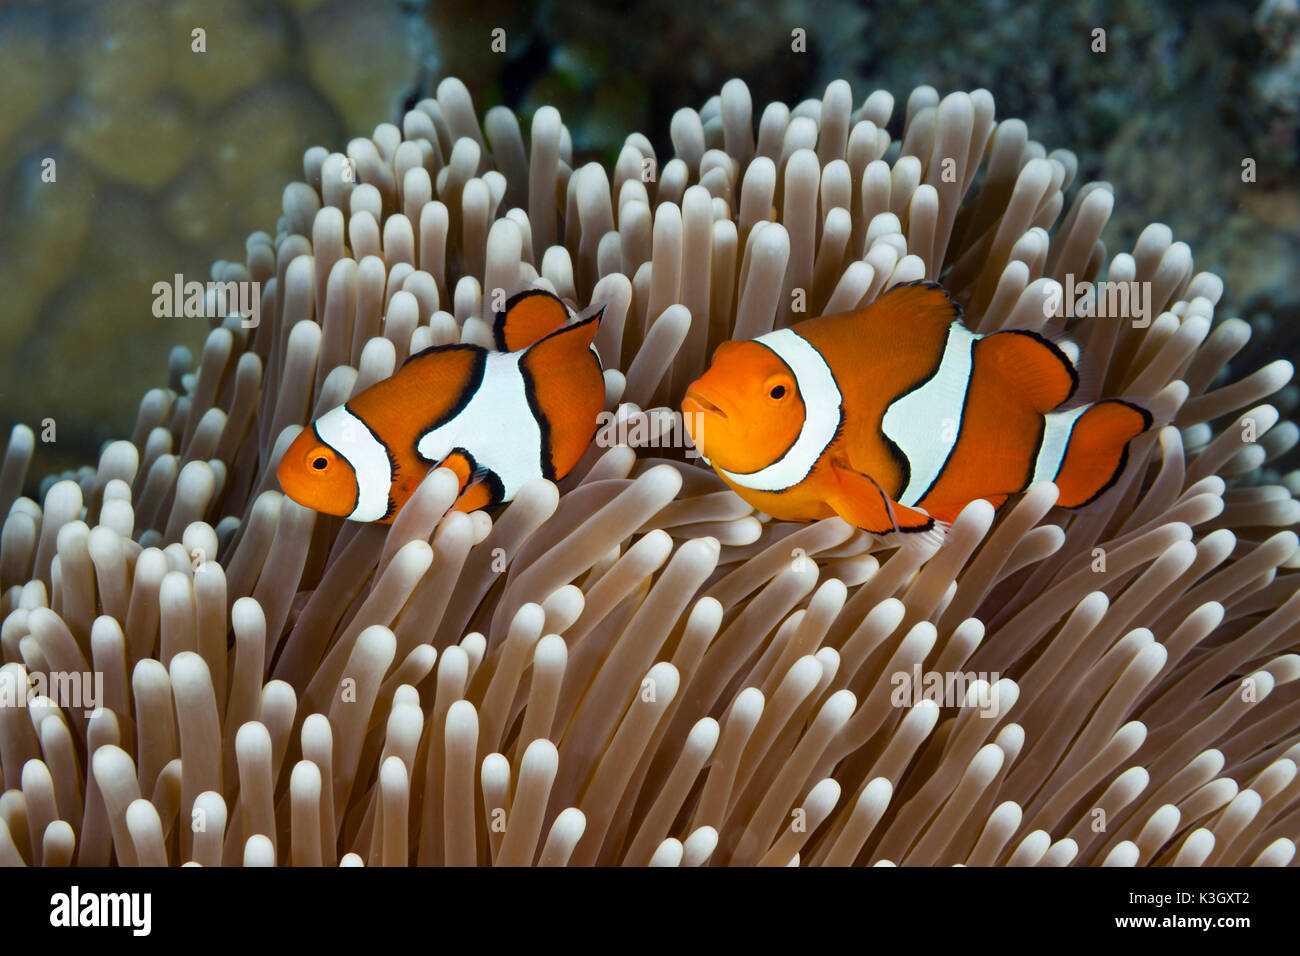 Clown Anemonefish, Amphiprion percula, Great Barrier Reef, Australia Stock Photo